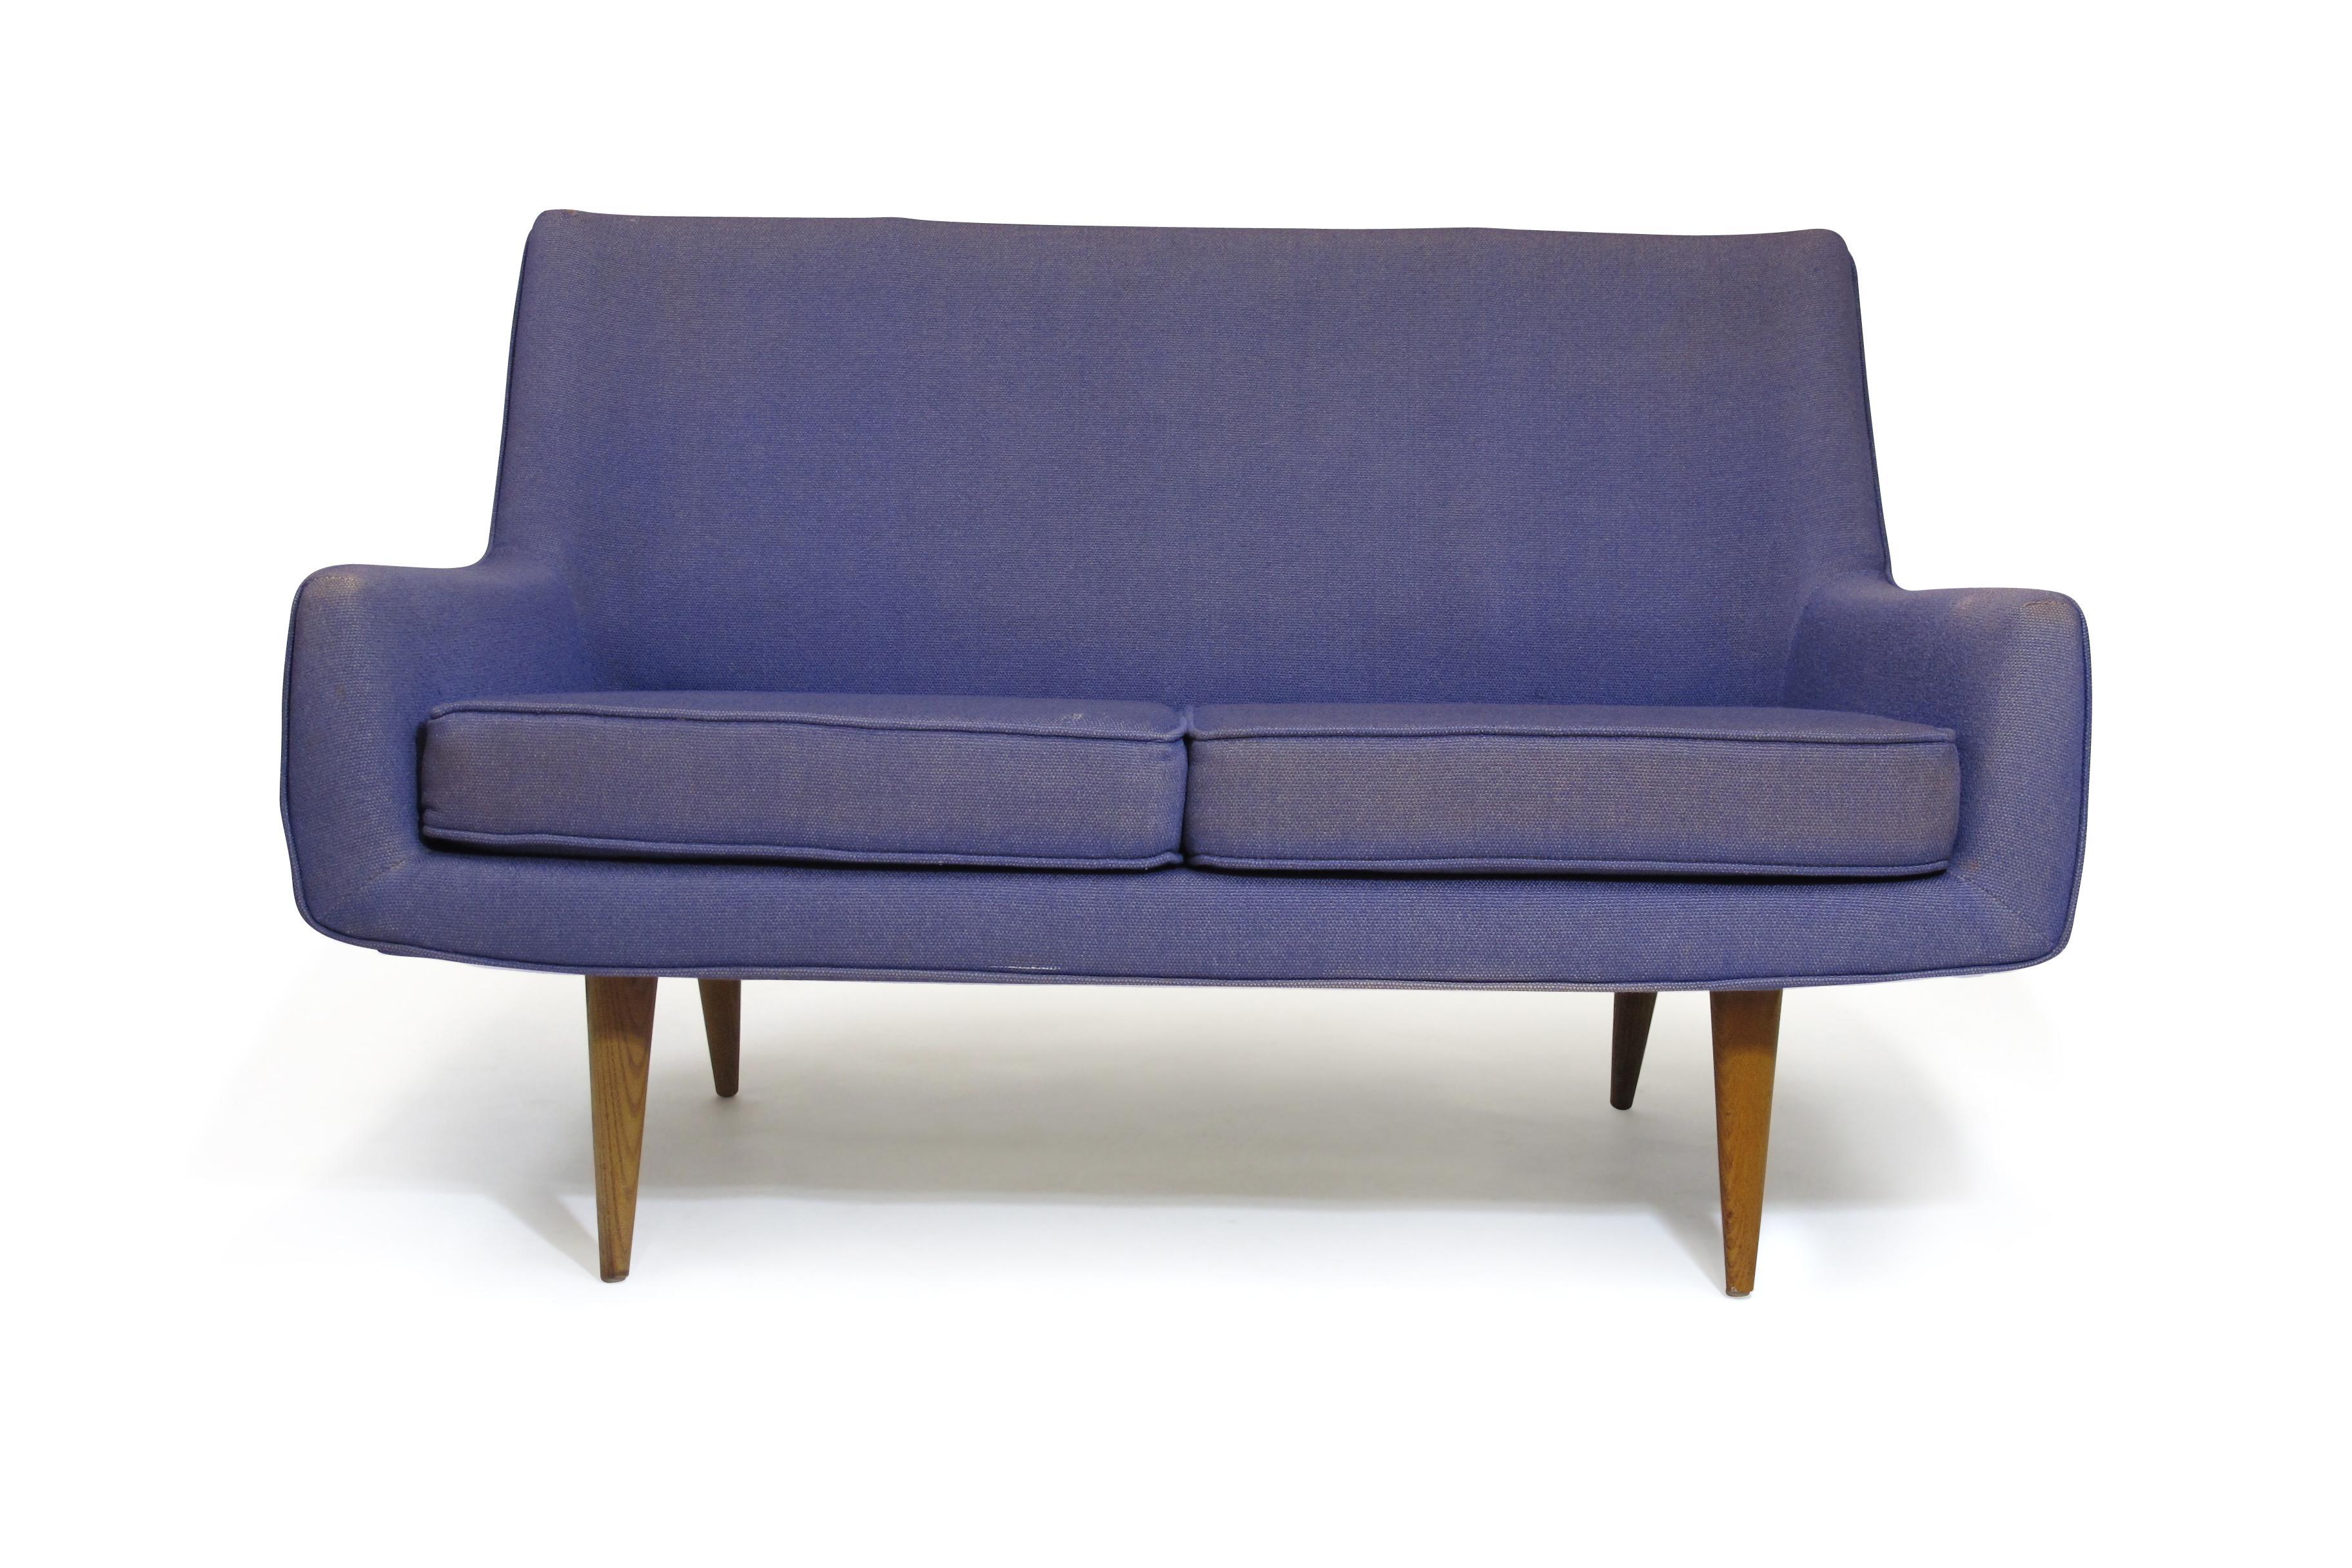 Danish Mid-century Settee for COM Reupholstery